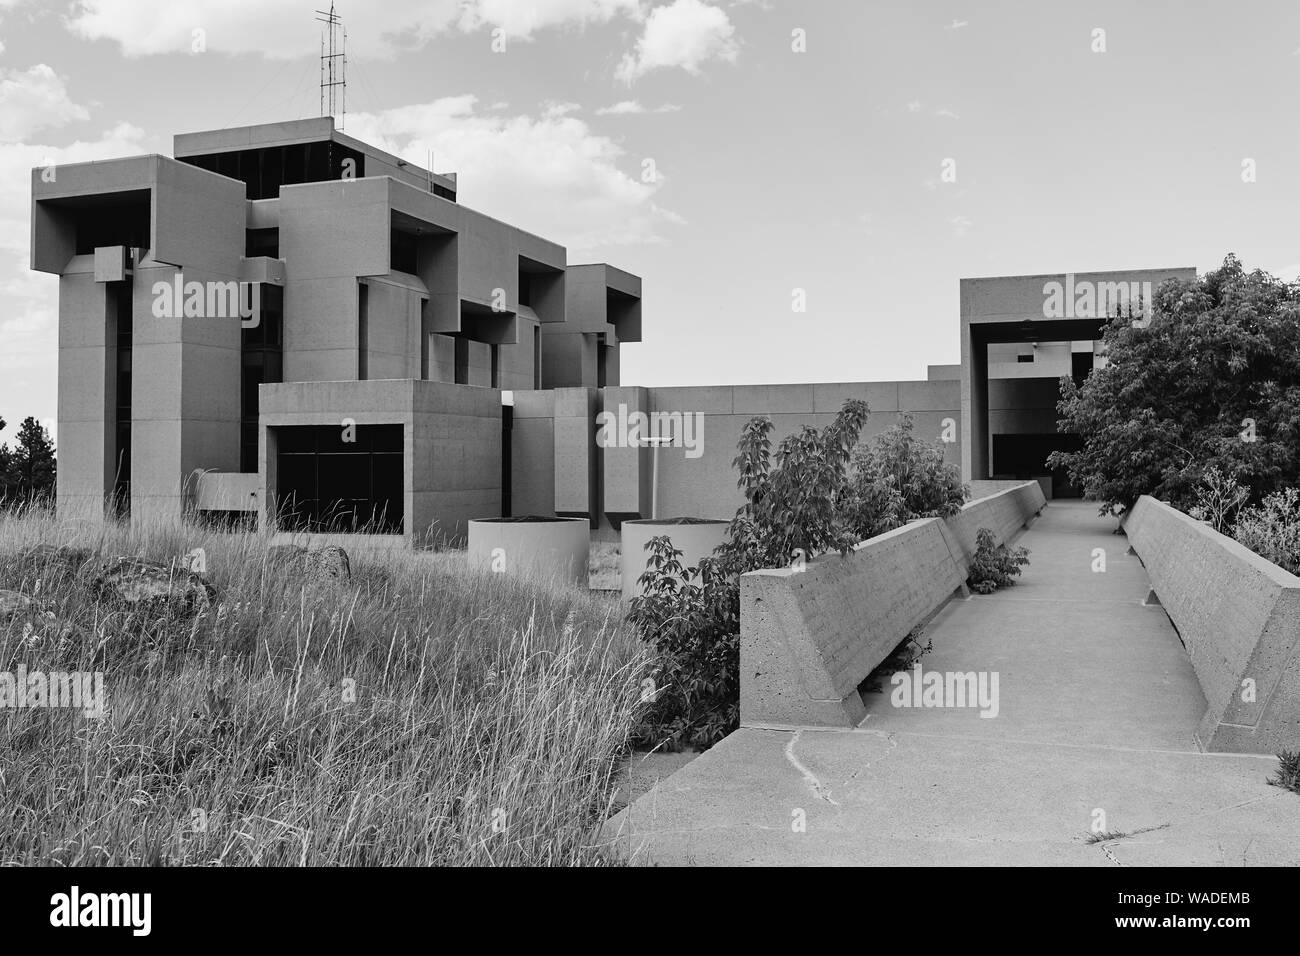 Boulder, Colorado - August 18th, 2019: Exterior in black and white of NCAR, National Center For Atmospheric Research designed by architect I.M. Pei Stock Photo